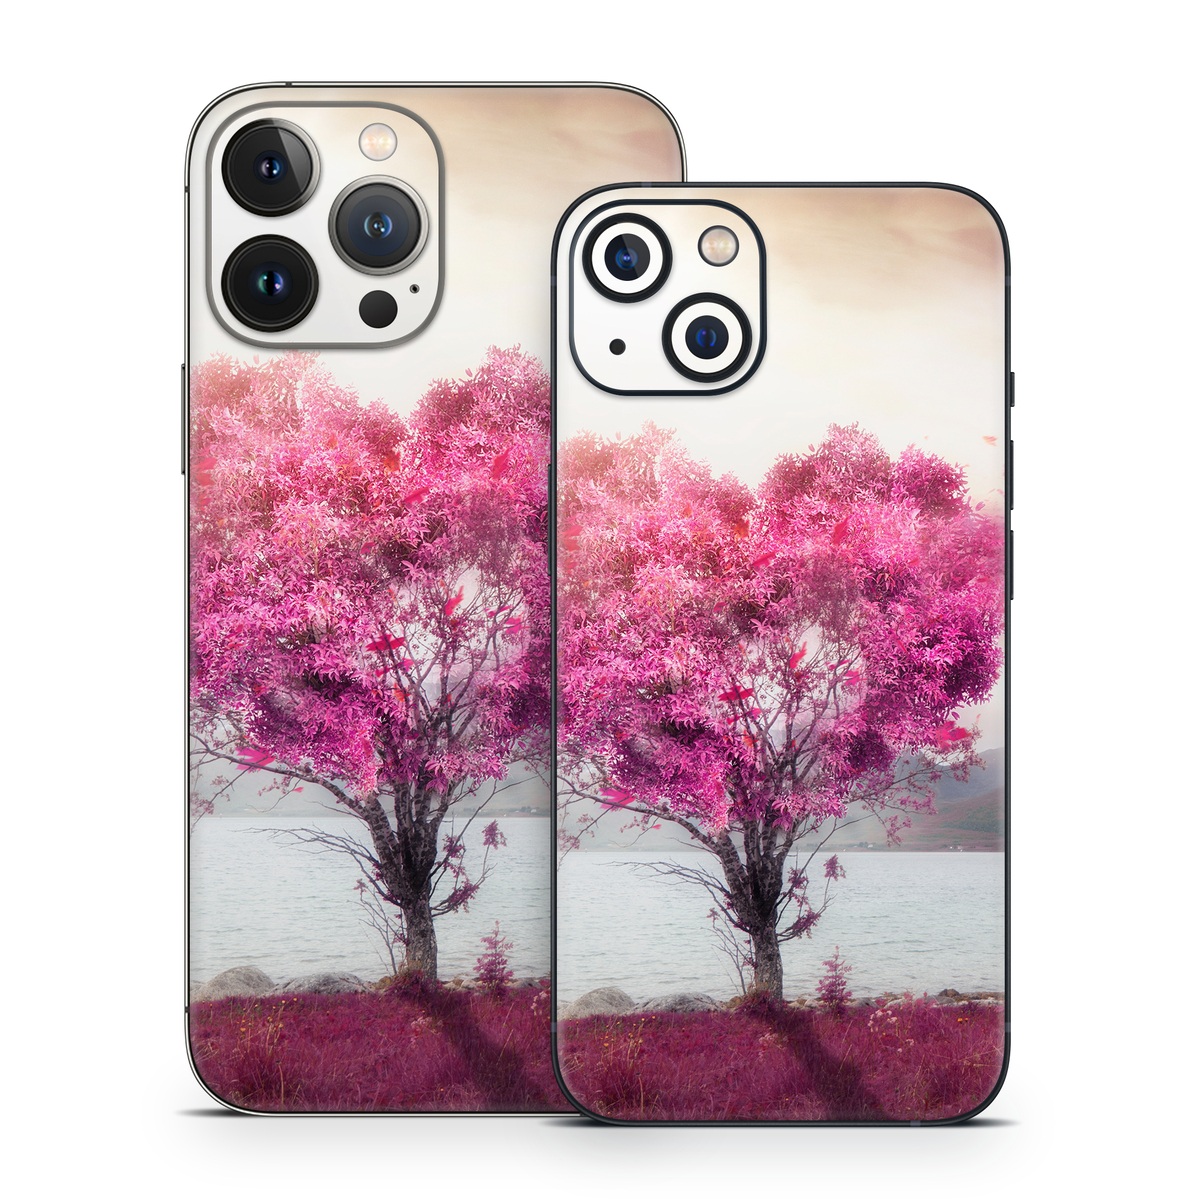 iPhone 13 Series Skin design of Sky, Nature, Natural landscape, Pink, Tree, Spring, Purple, Landscape, Cloud, Magenta, with pink, yellow, blue, black, gray colors